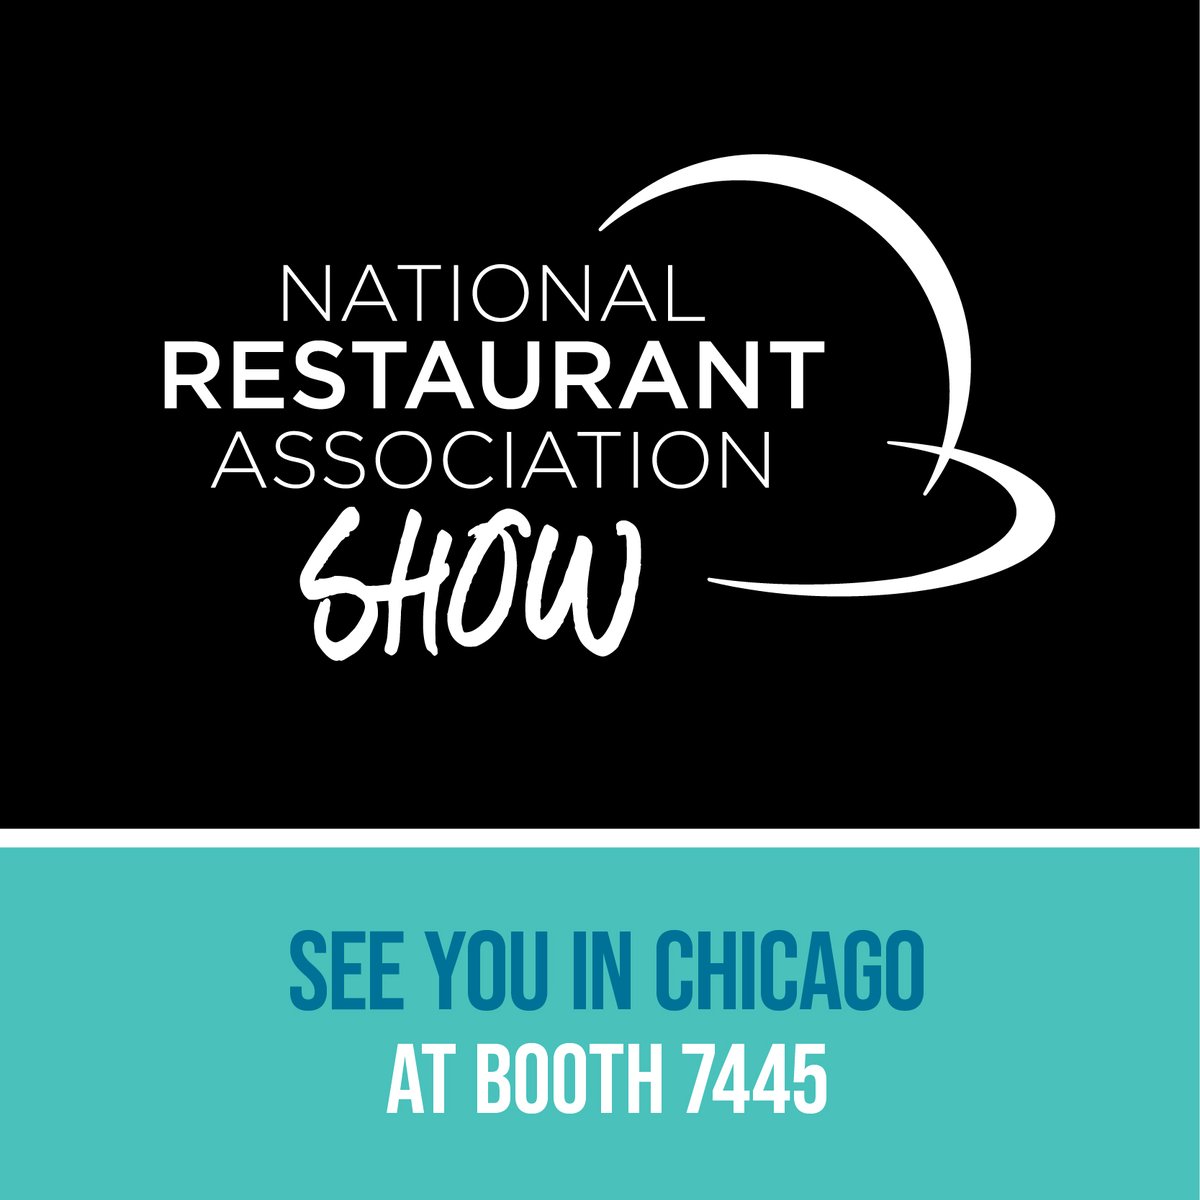 Are you headed to the 2024 National Restaurant Association Show in Chicago? Find us at booth 7445 to learn more about our innovative automated solutions for your back-of-house. 

Visit ow.ly/PQis50Rmy0E to book a meeting with our team.

#restauranttechnologies #Chicago